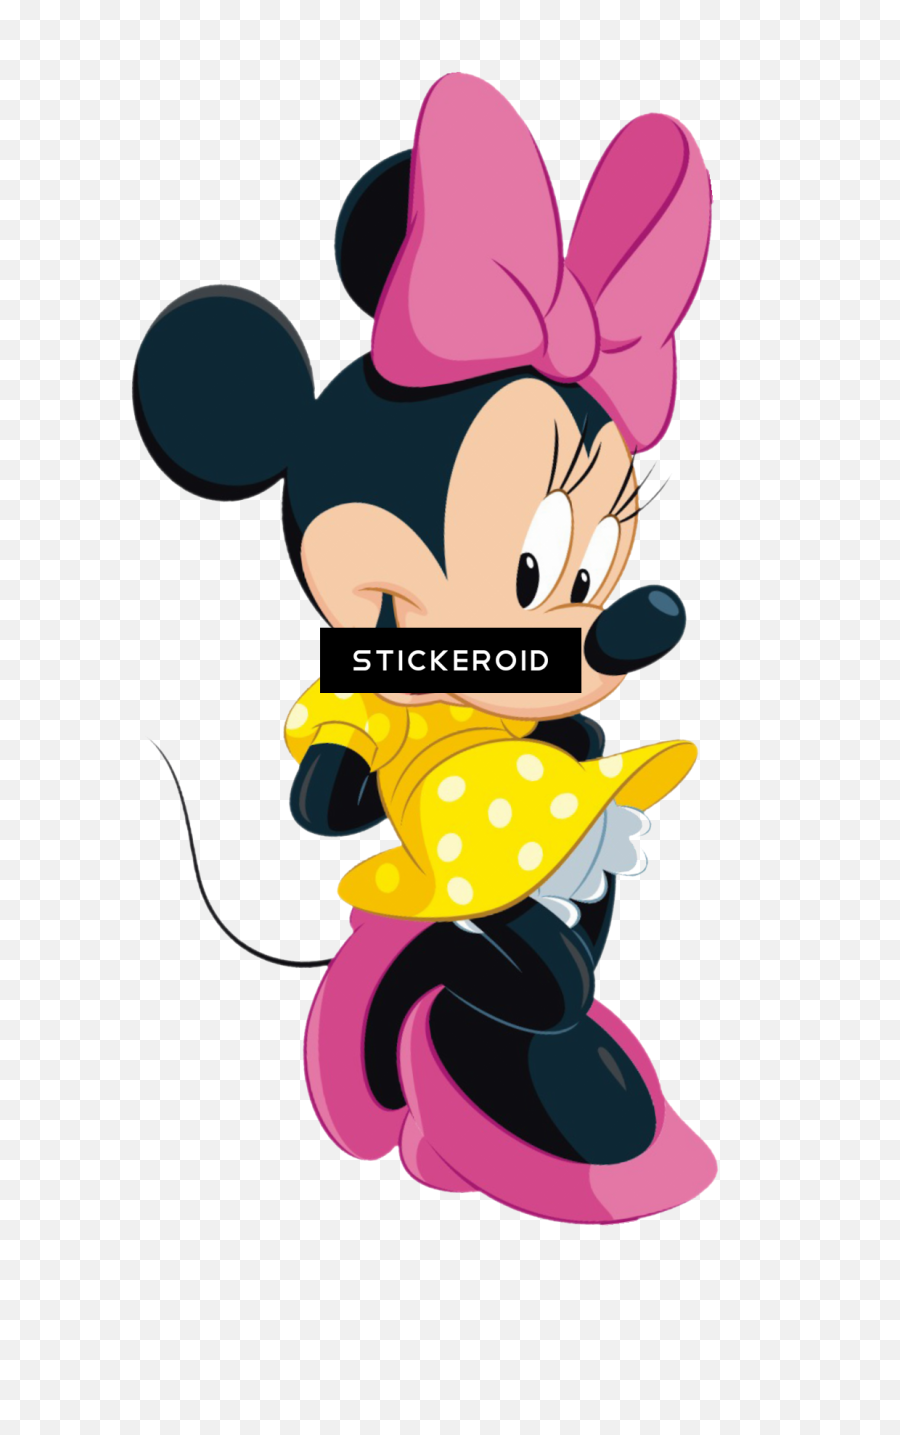 Download Minnie Mouse - Minnie Mouse Big Eyelashes Png Image Minnie Mouse Disney Character,Minnie Mouse Icon